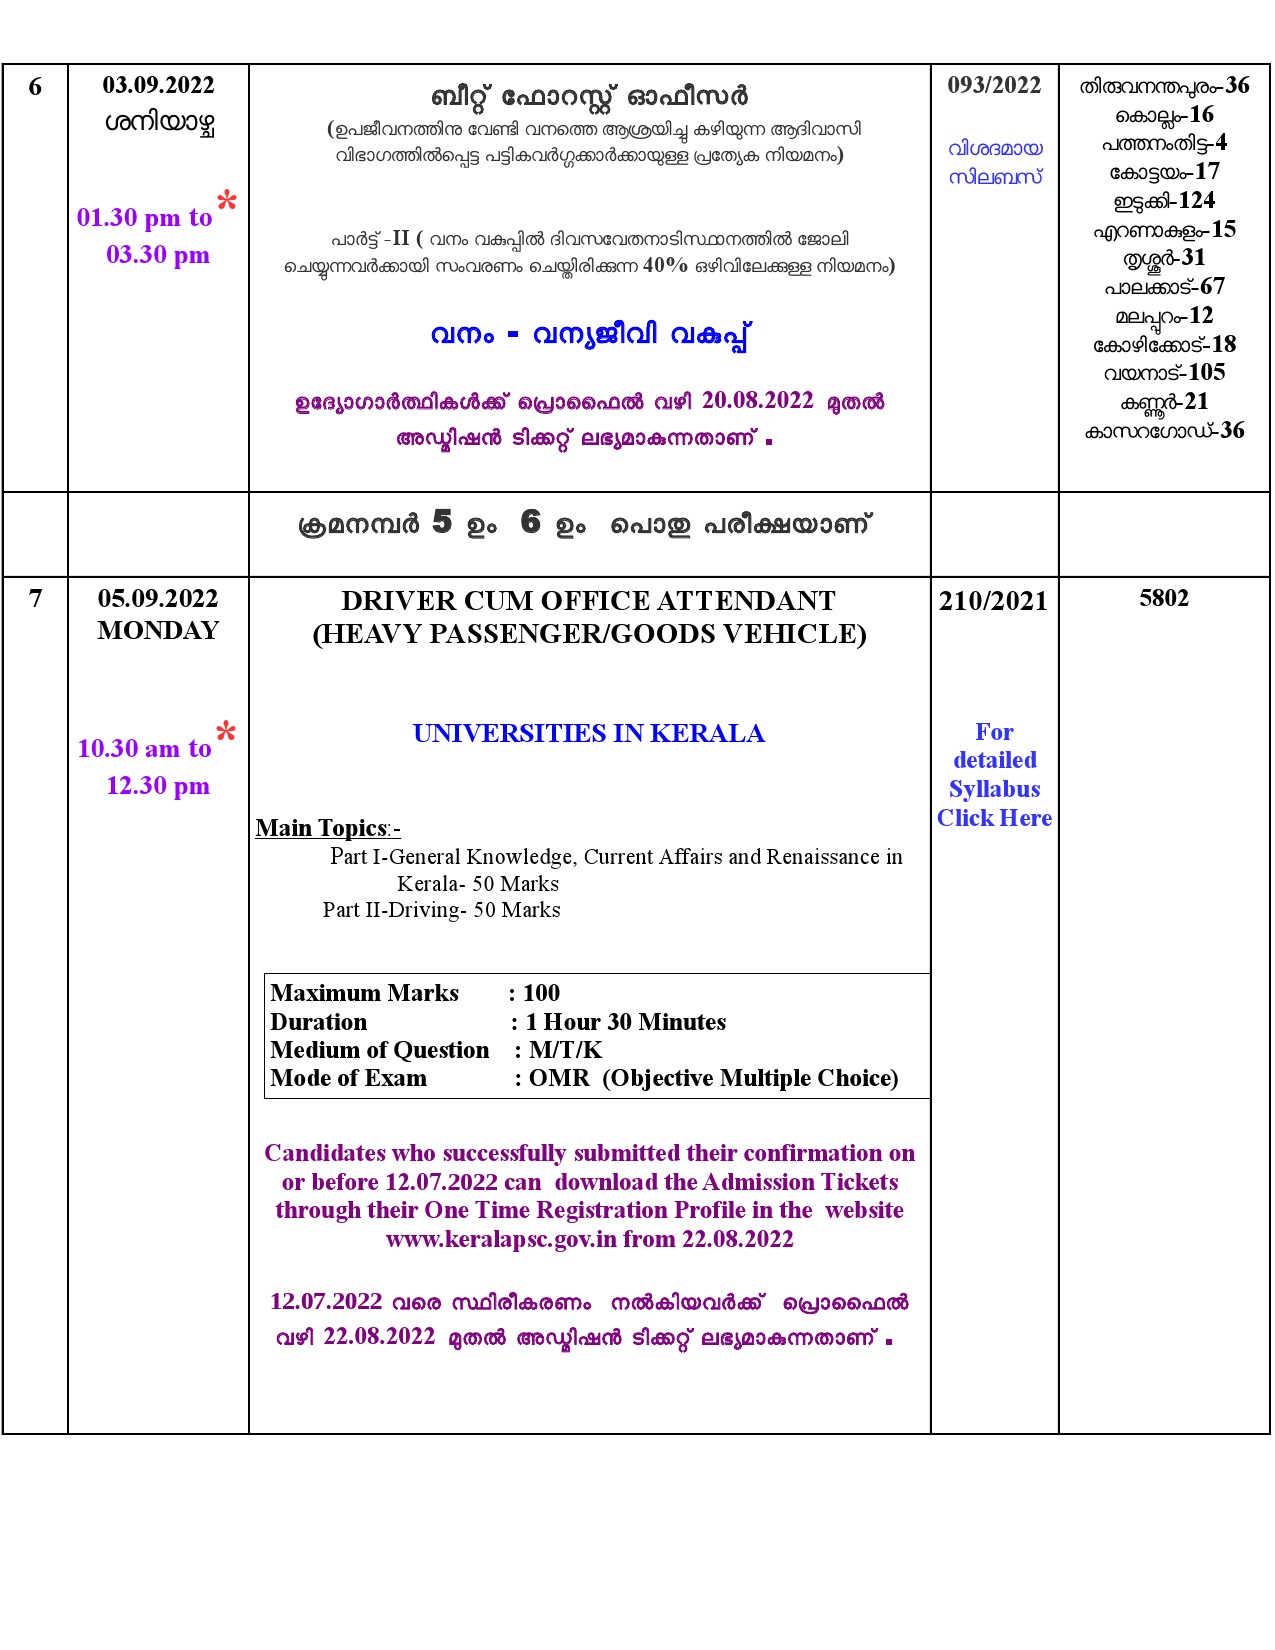 Examination Programme For The Month Of September 2022 - Notification Image 4